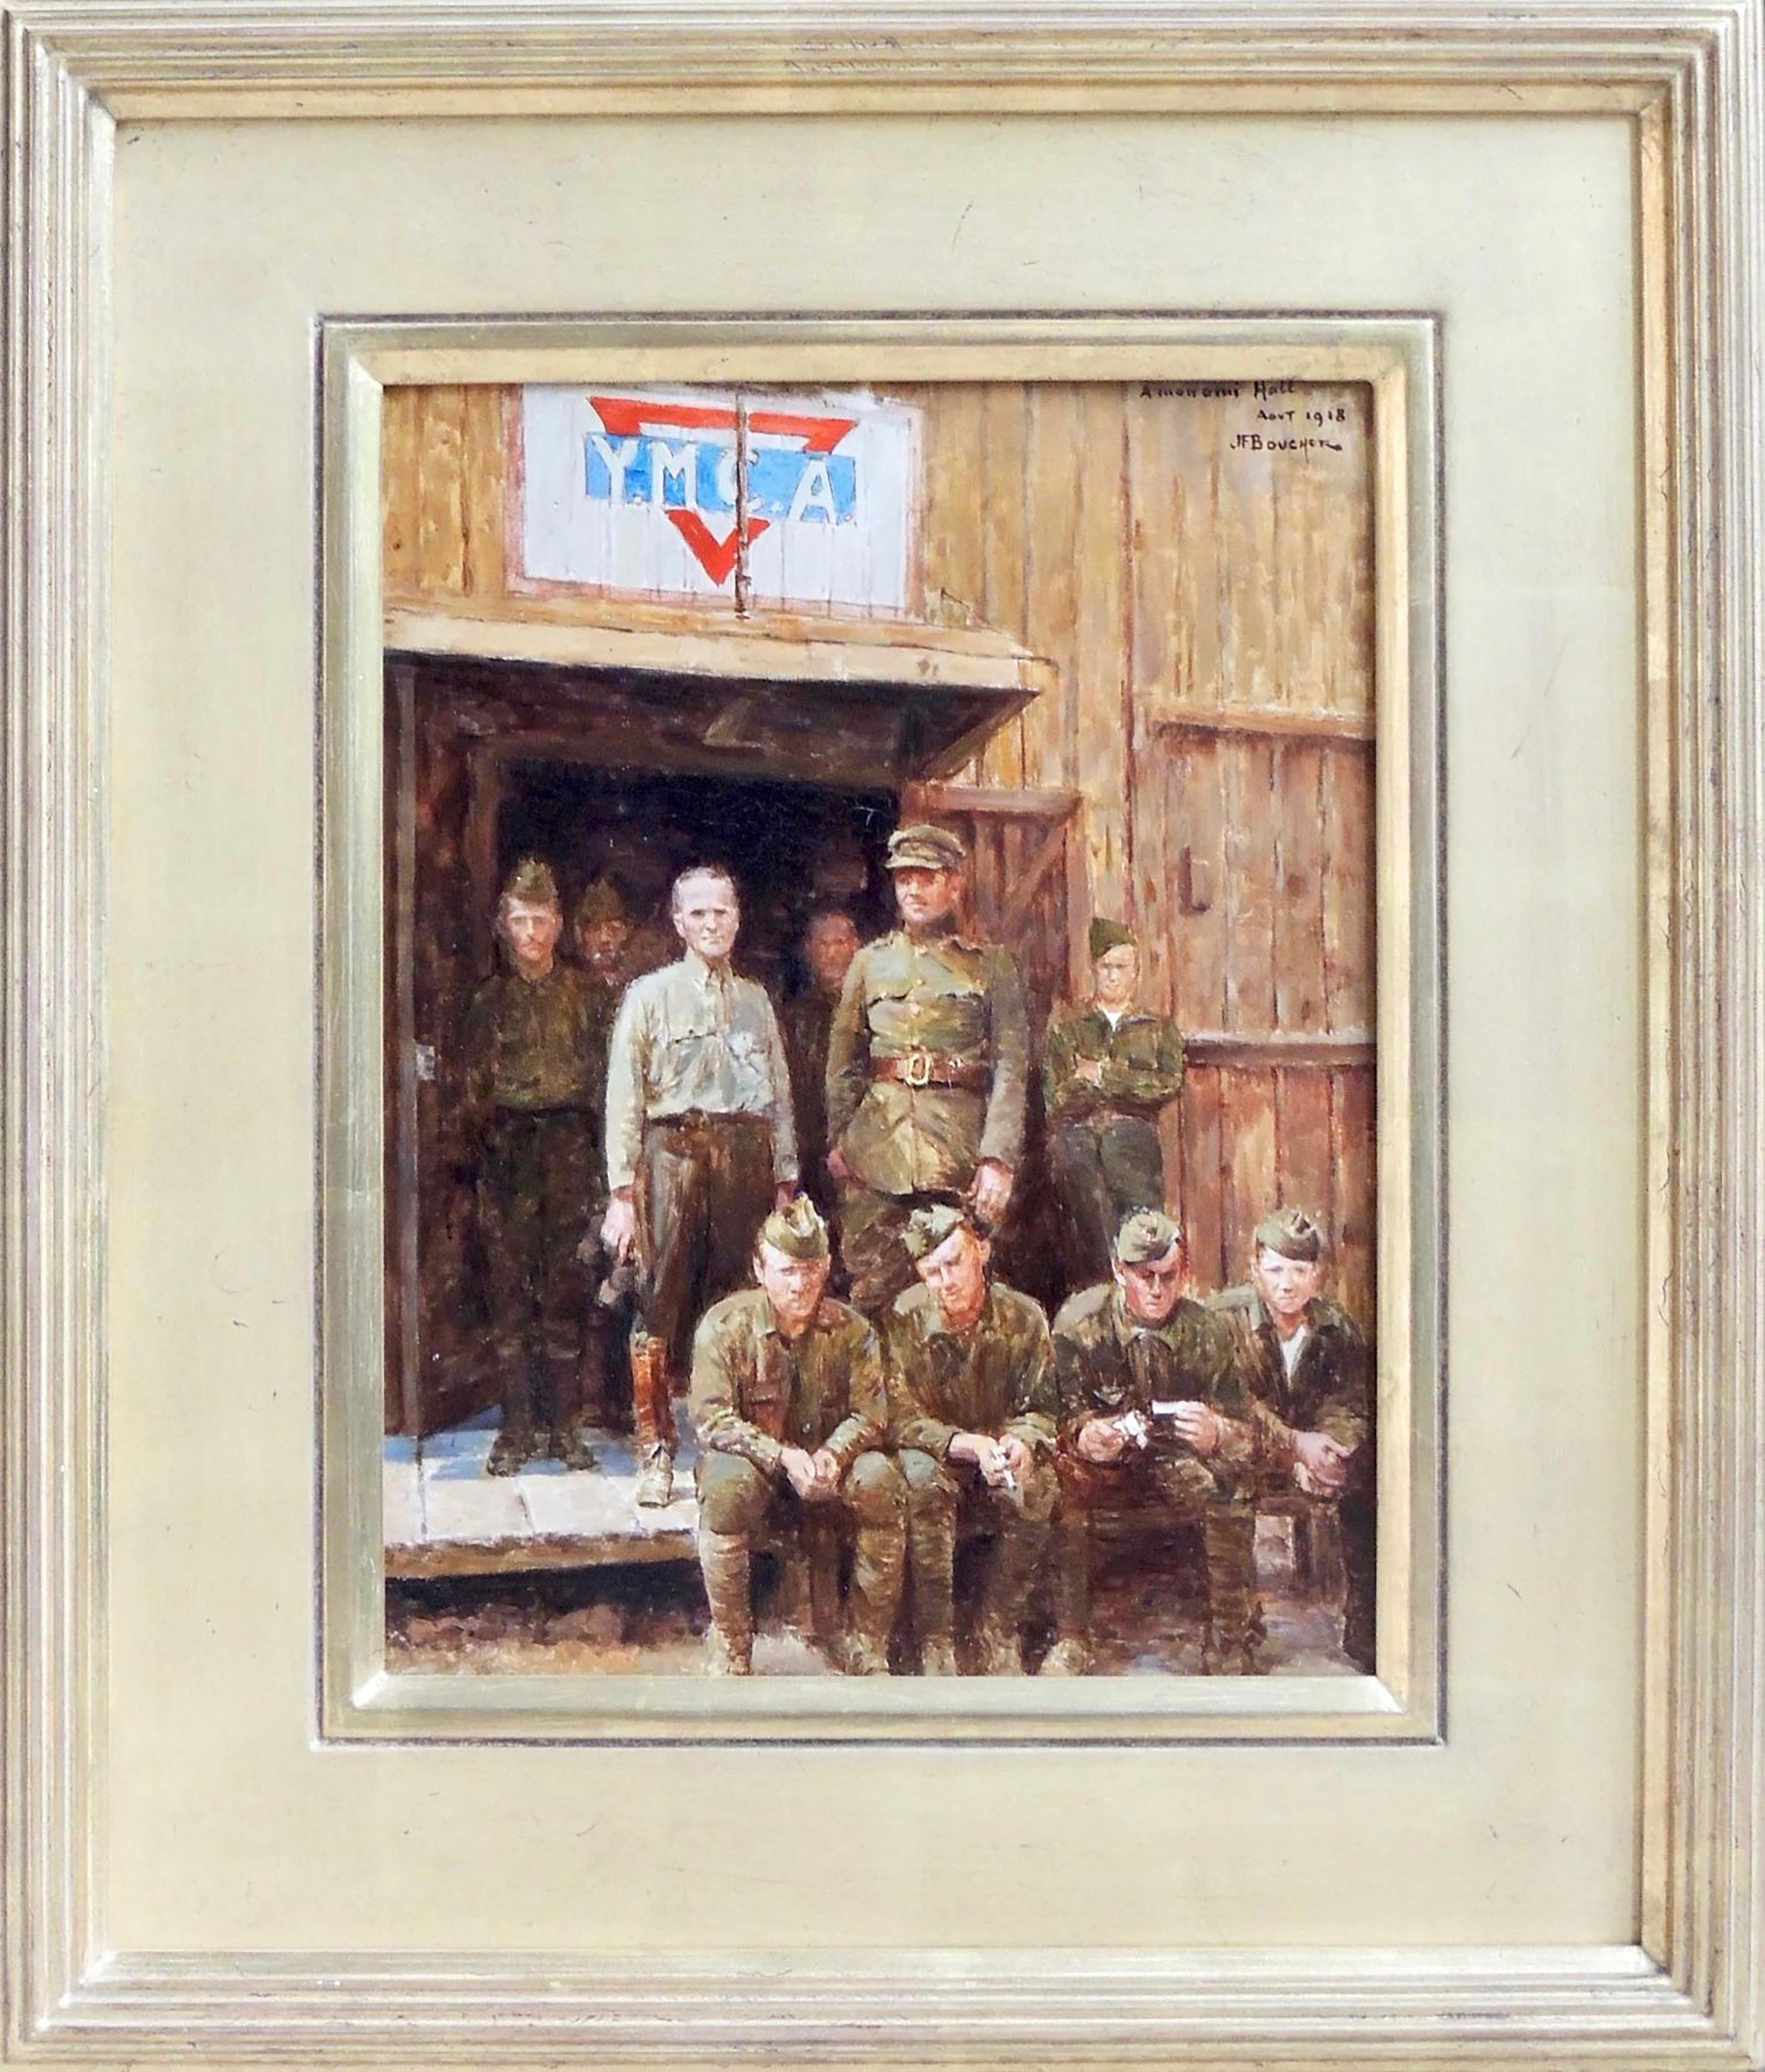 American Soldier YMCA - Painting by Félix Bouchor